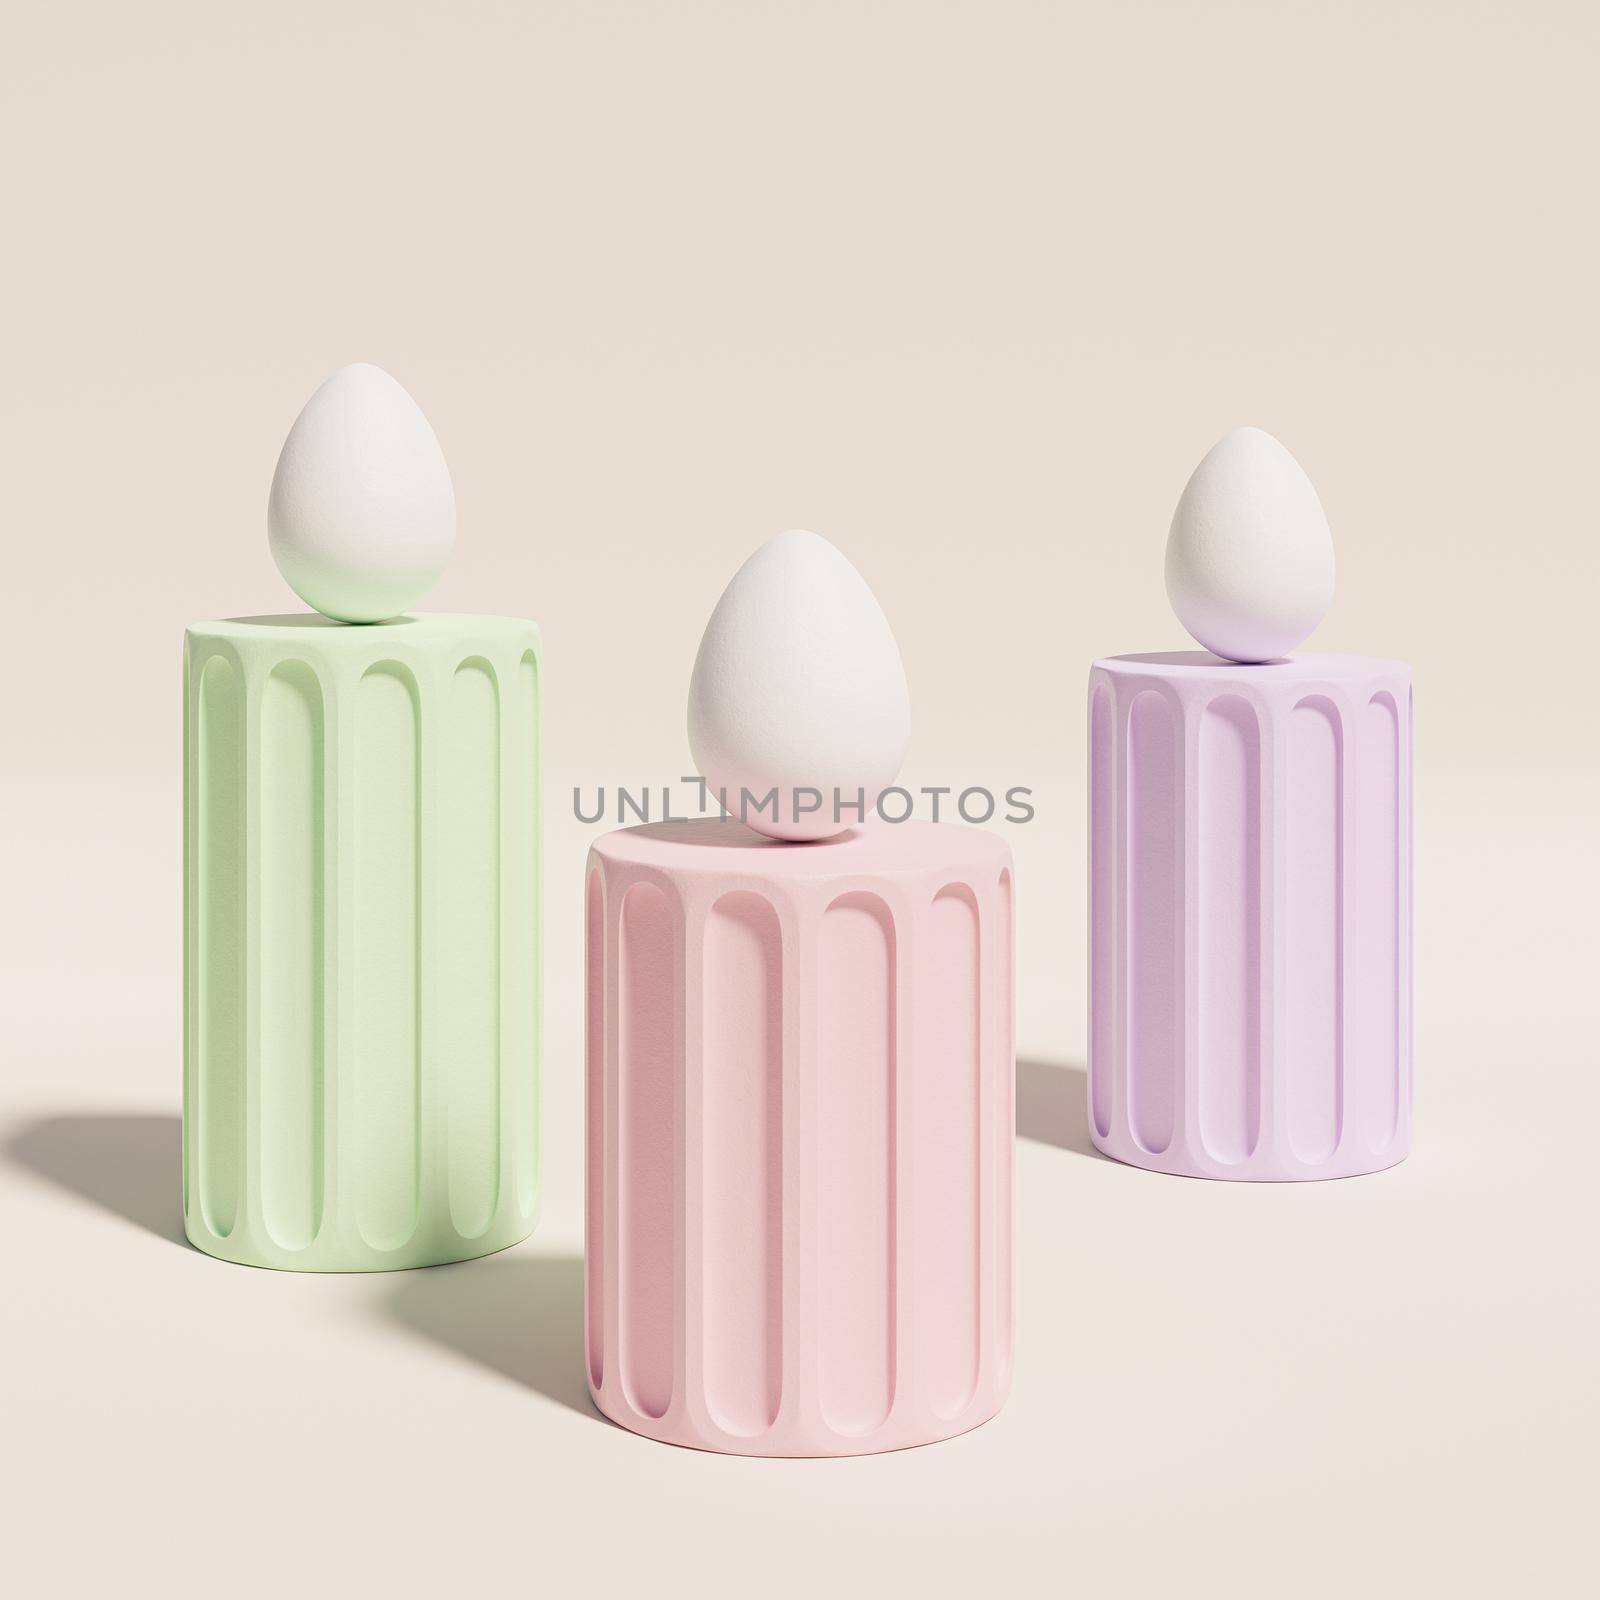 White Easter eggs on pastel colored pillar podiums, spring April holidays card, 3d illustration render by Frostroomhead